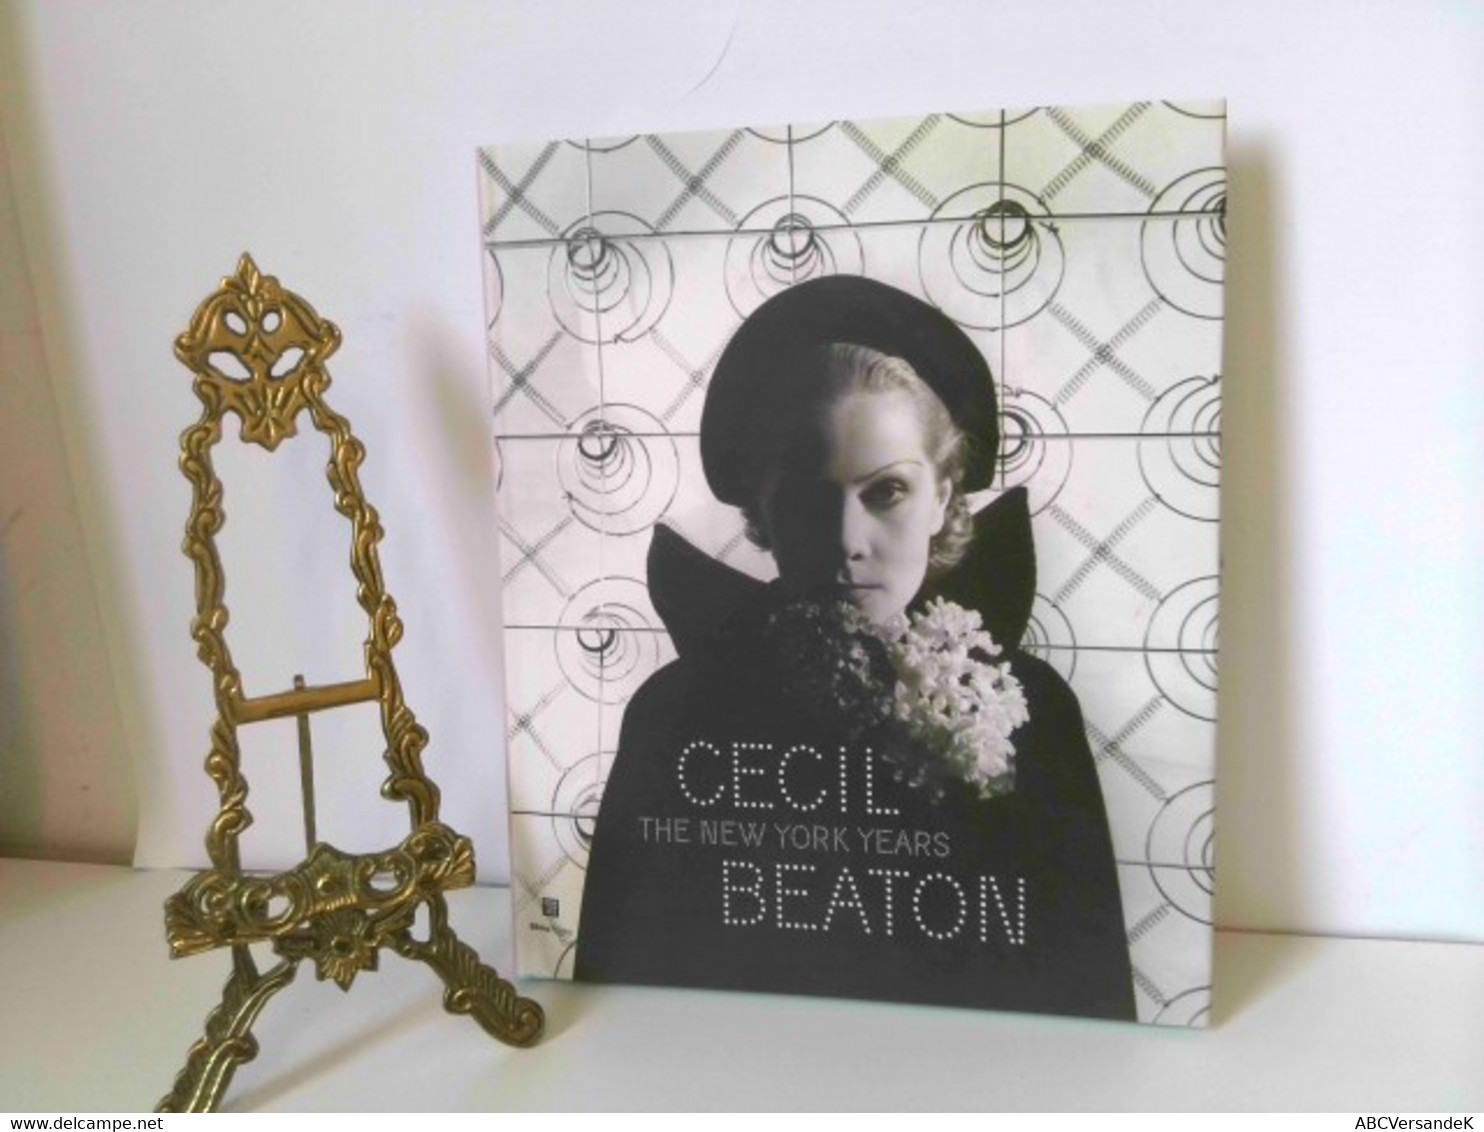 Cecil Beaton: The New York Years - Photography